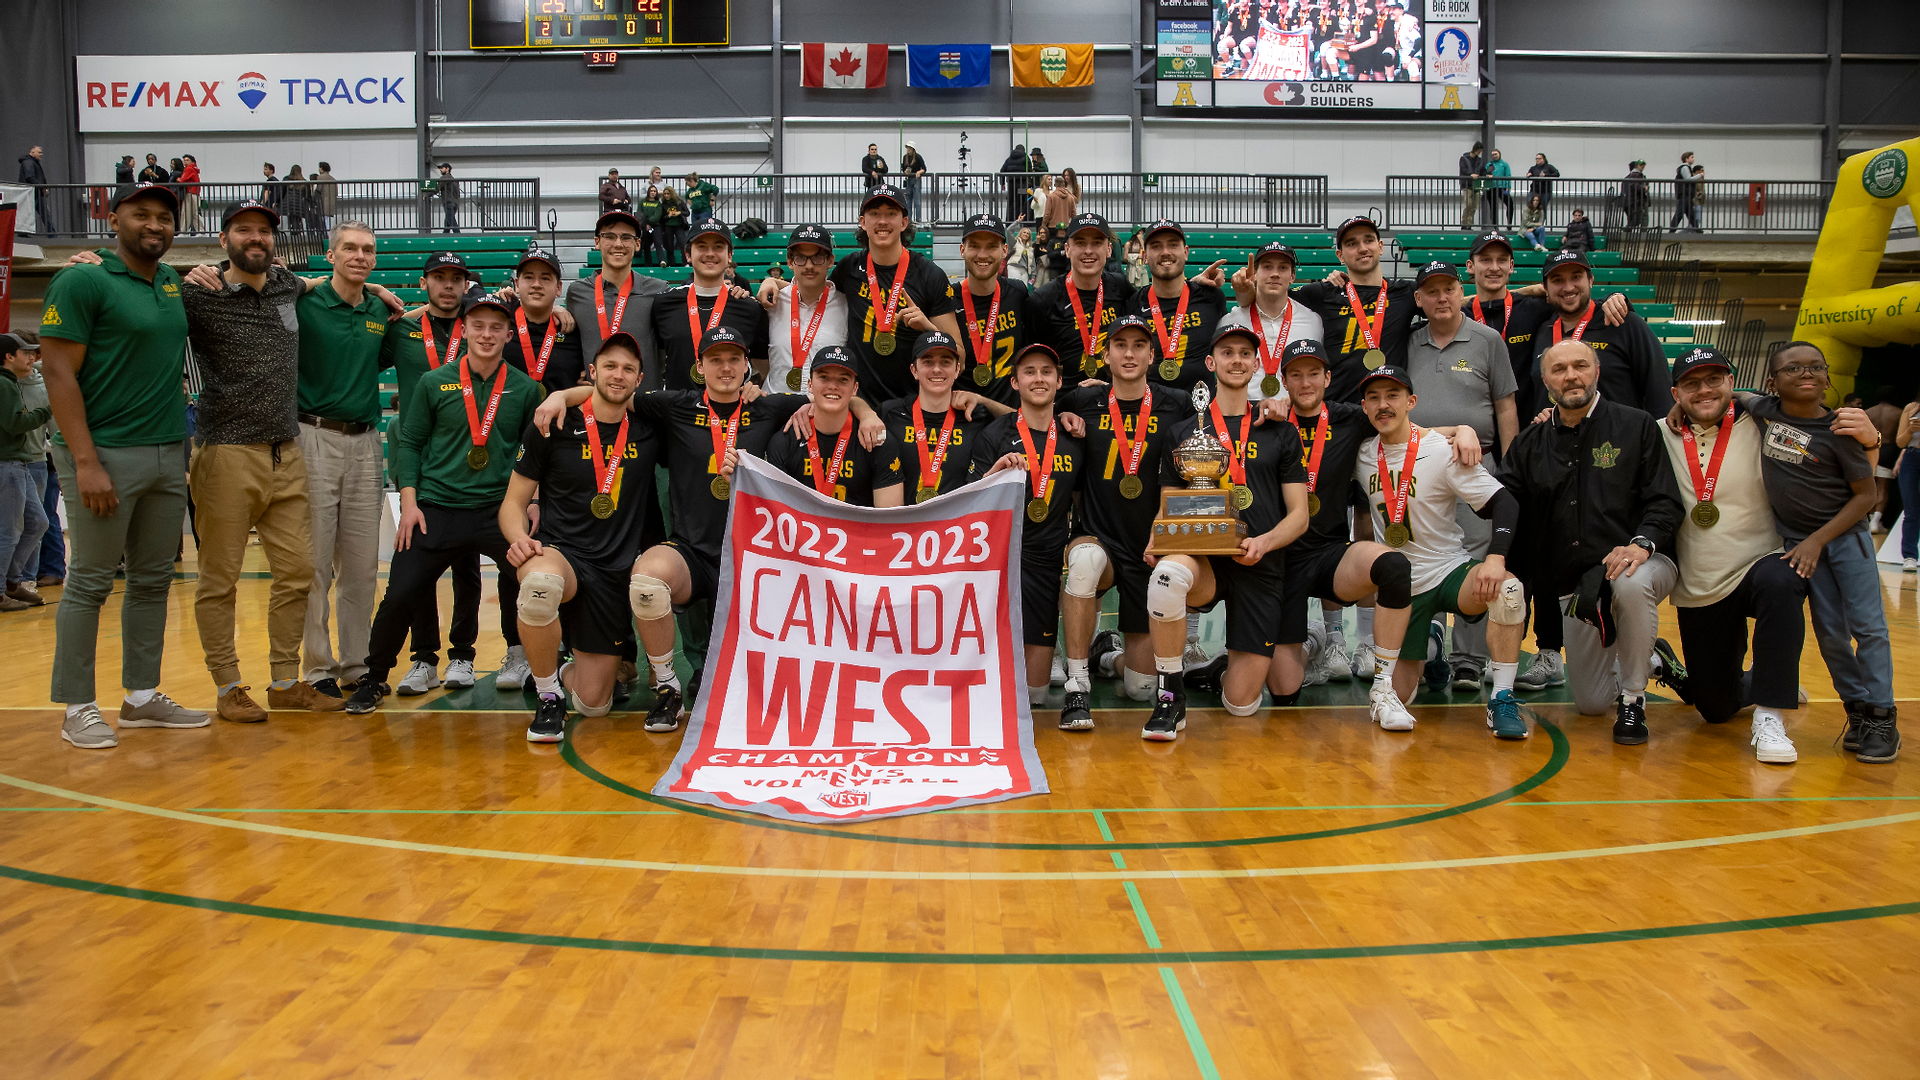 The Alberta Golden Bears took home the 2022-23 CW banner. Photo by Don Voaklander.